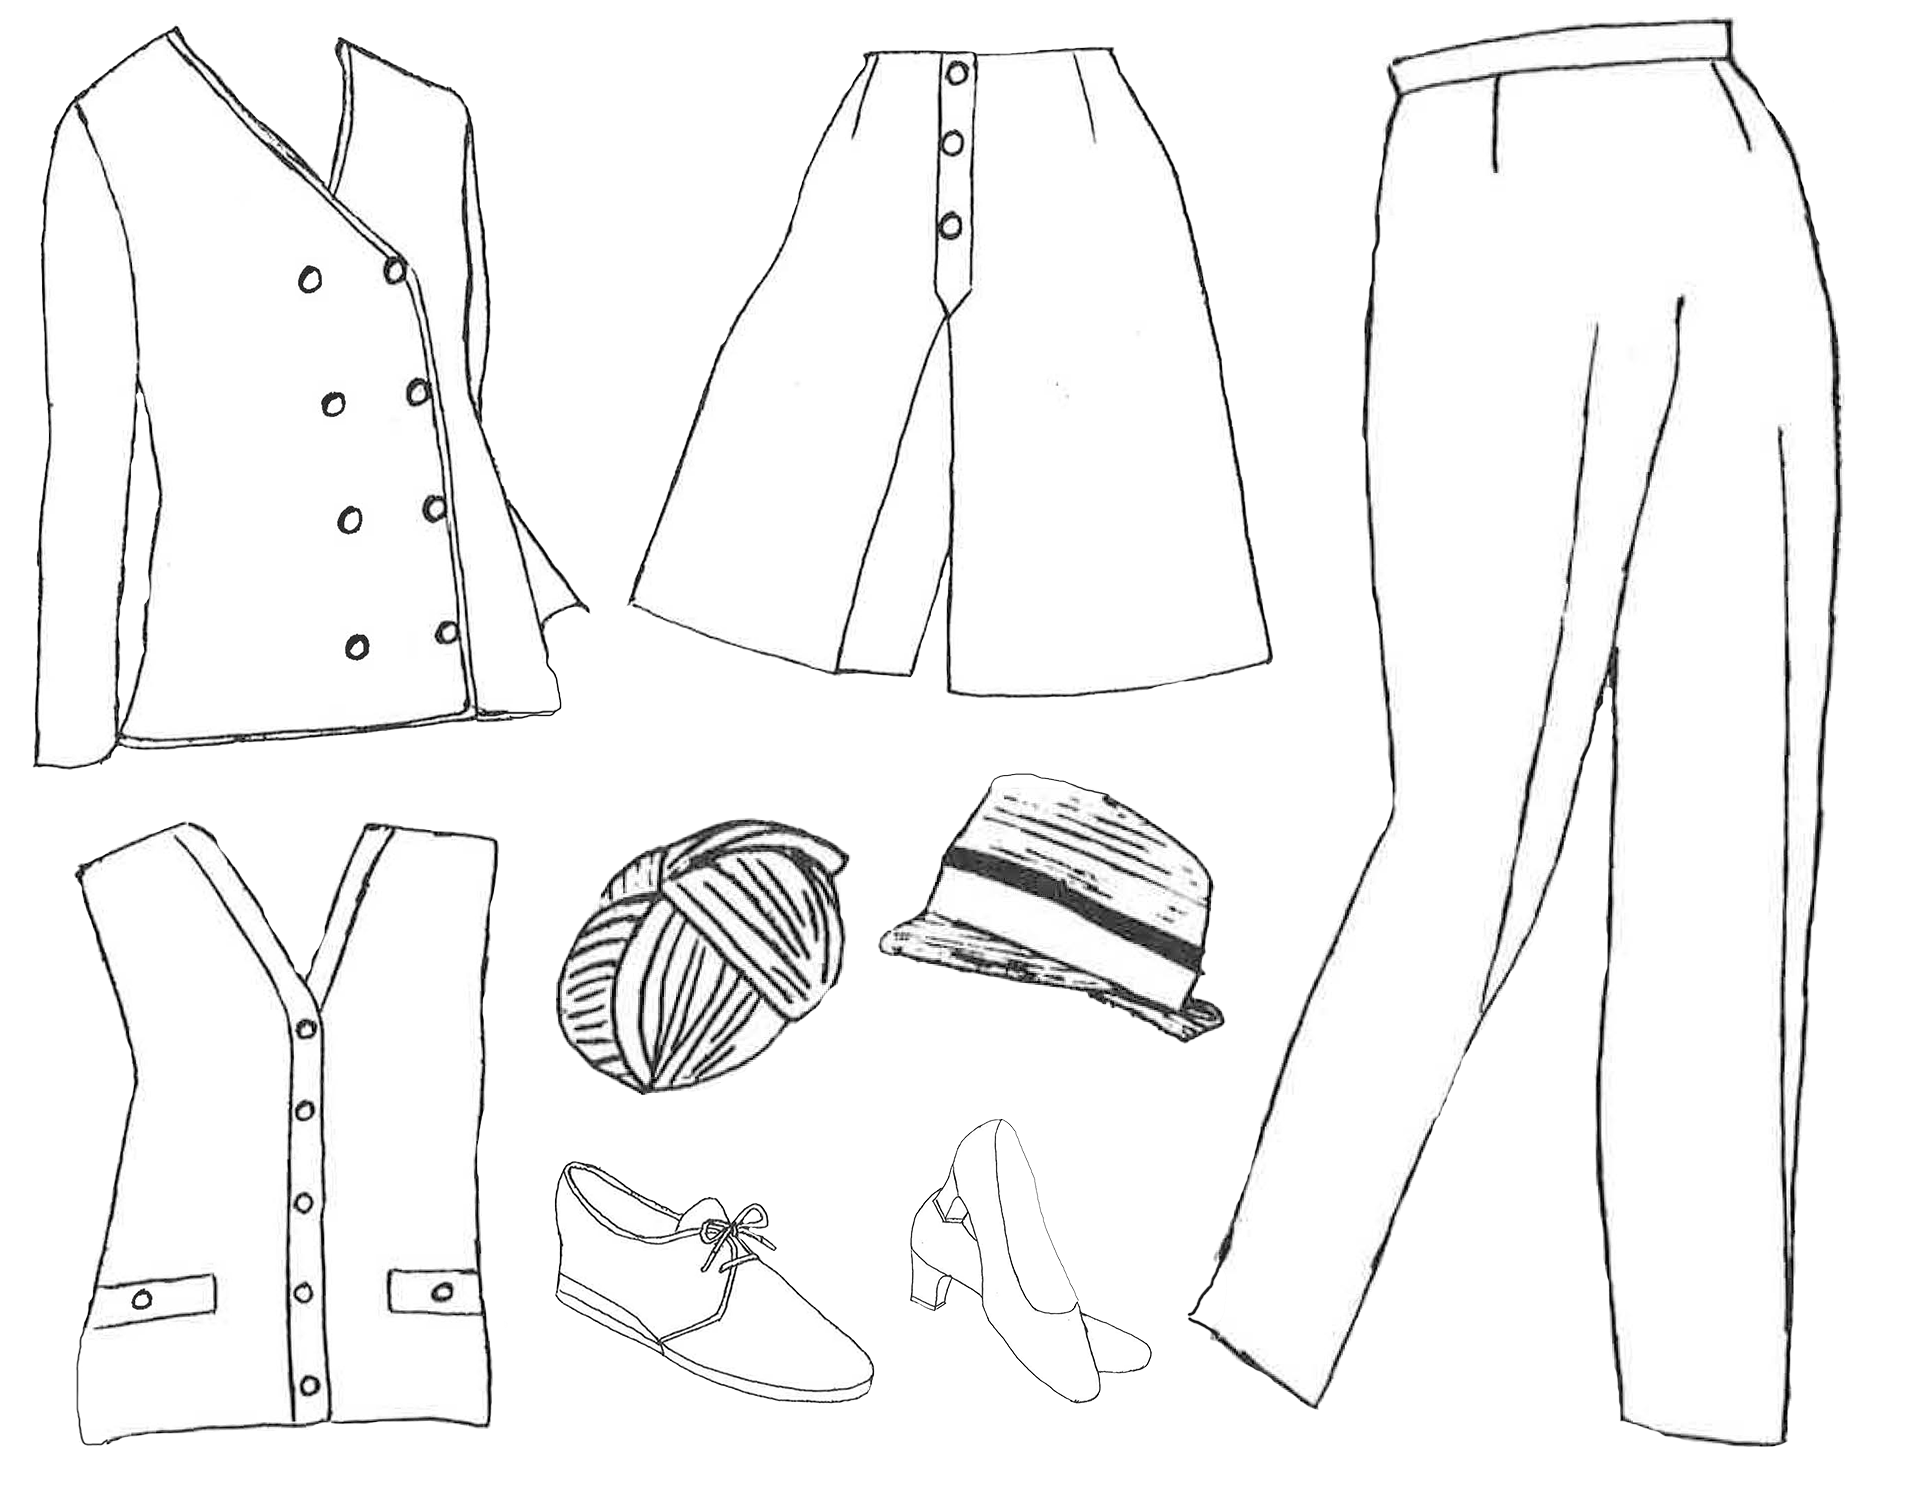 Sketches of blazer, pants, culottes, shoes, and hats for women's uniform